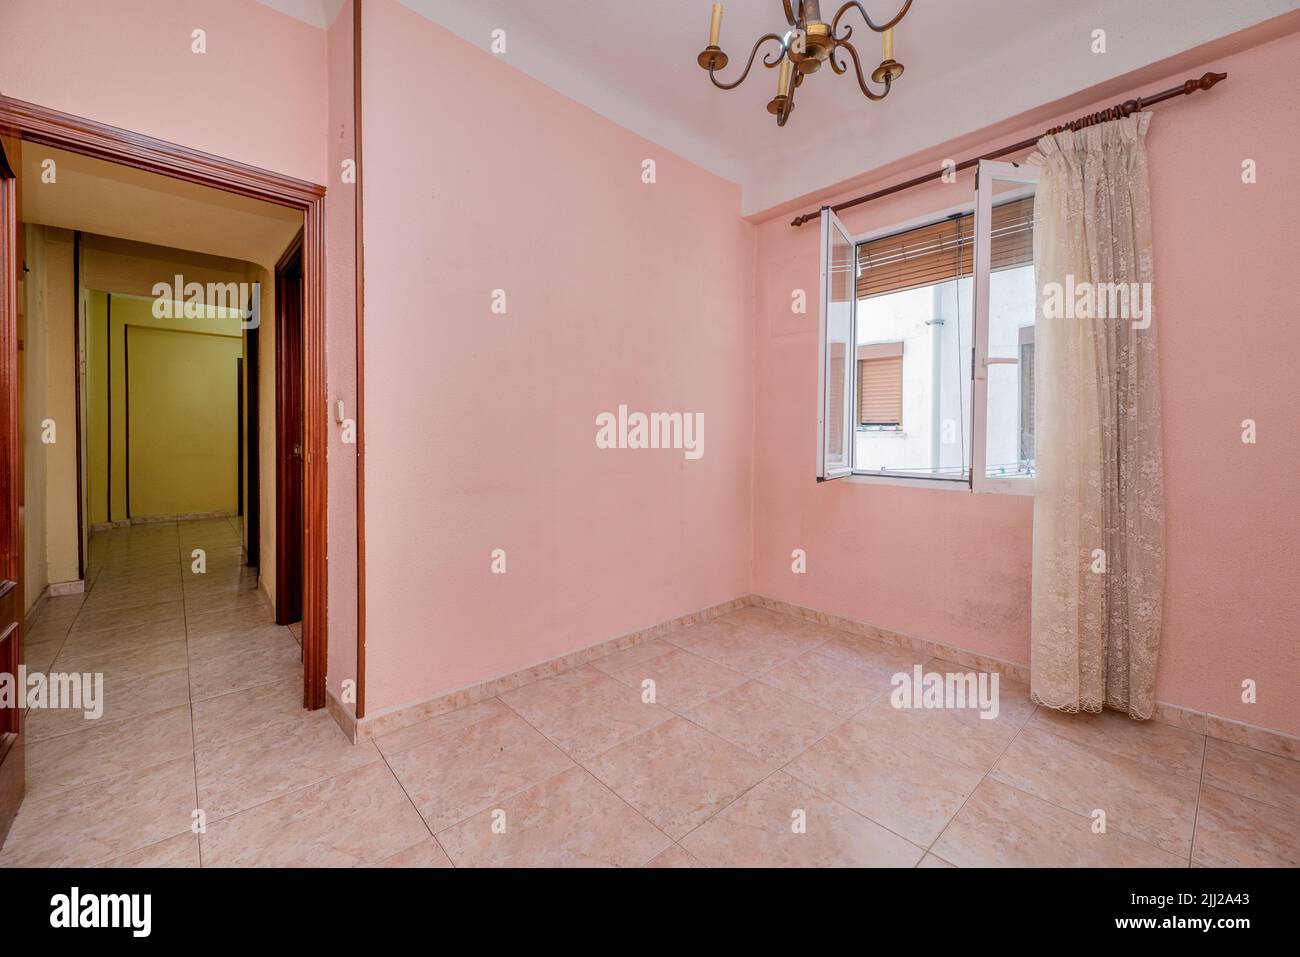 Empty room with pink stoneware floor, pink painted walls and matching woodwork and window with white curtains Stock Photo